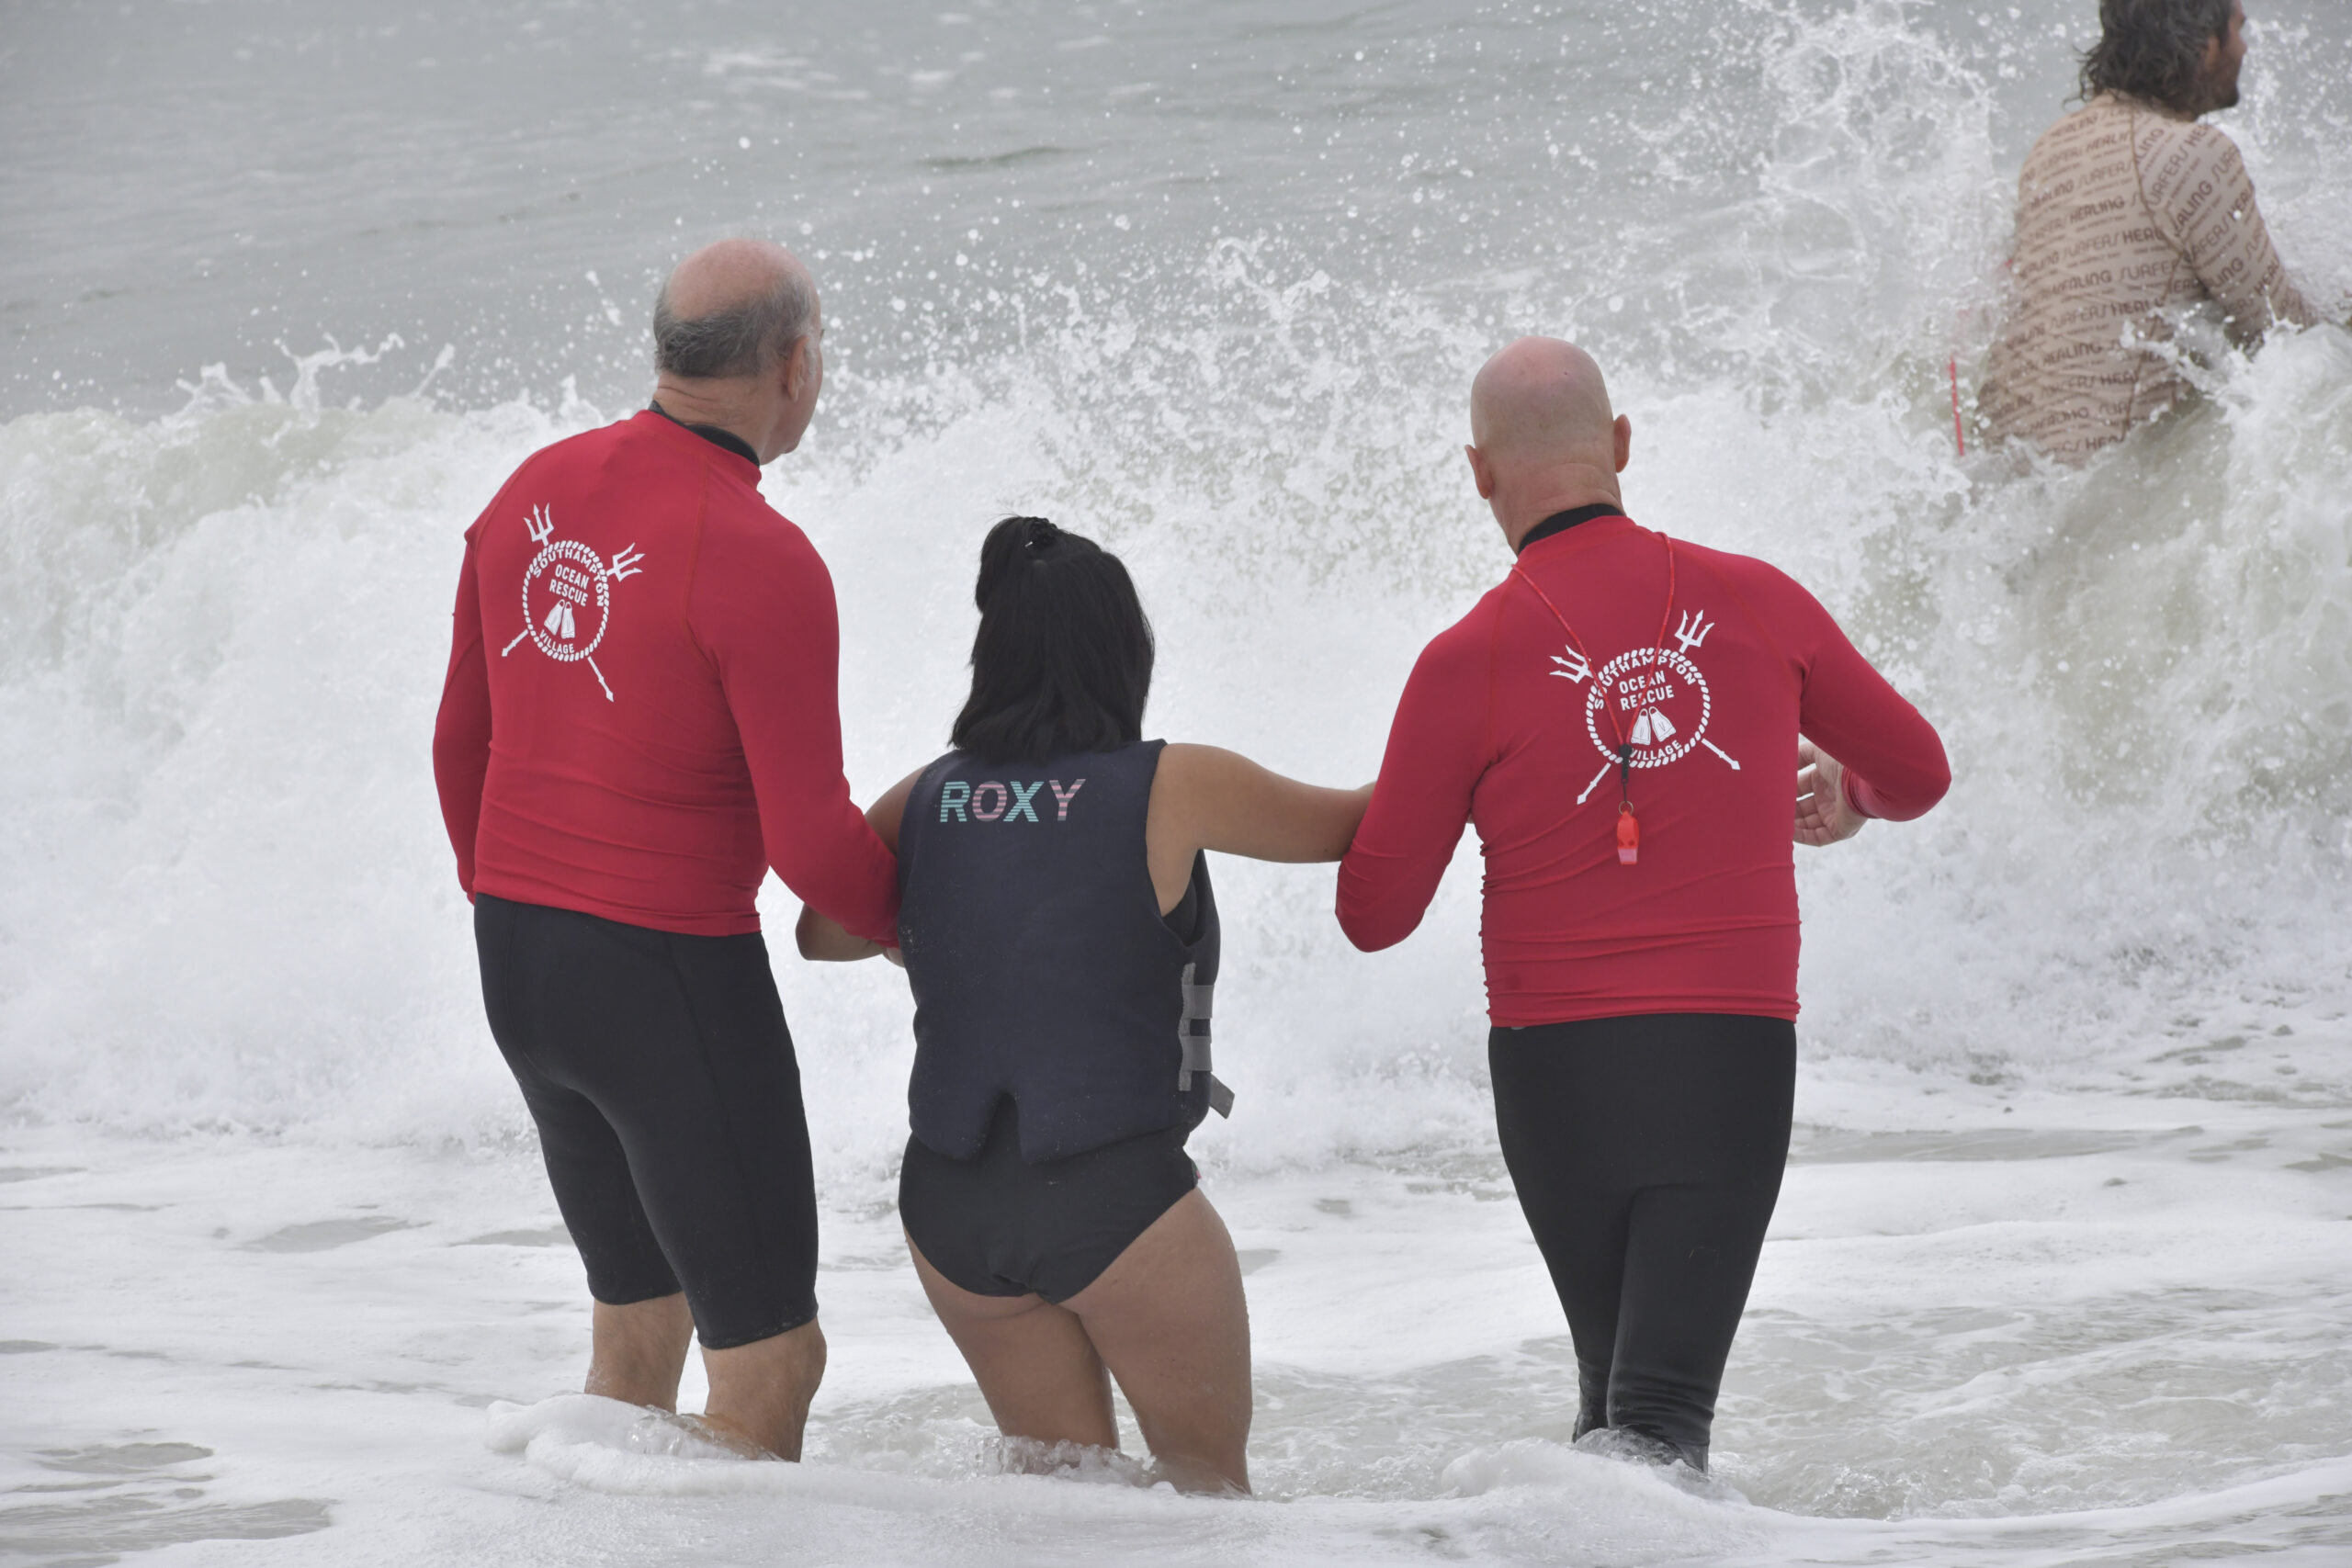 Members of Southampton Village Ocean Rescue help a participant into the water at Surfers for Healing at Ponquogue Beach on September 14.  DANA  SHAW